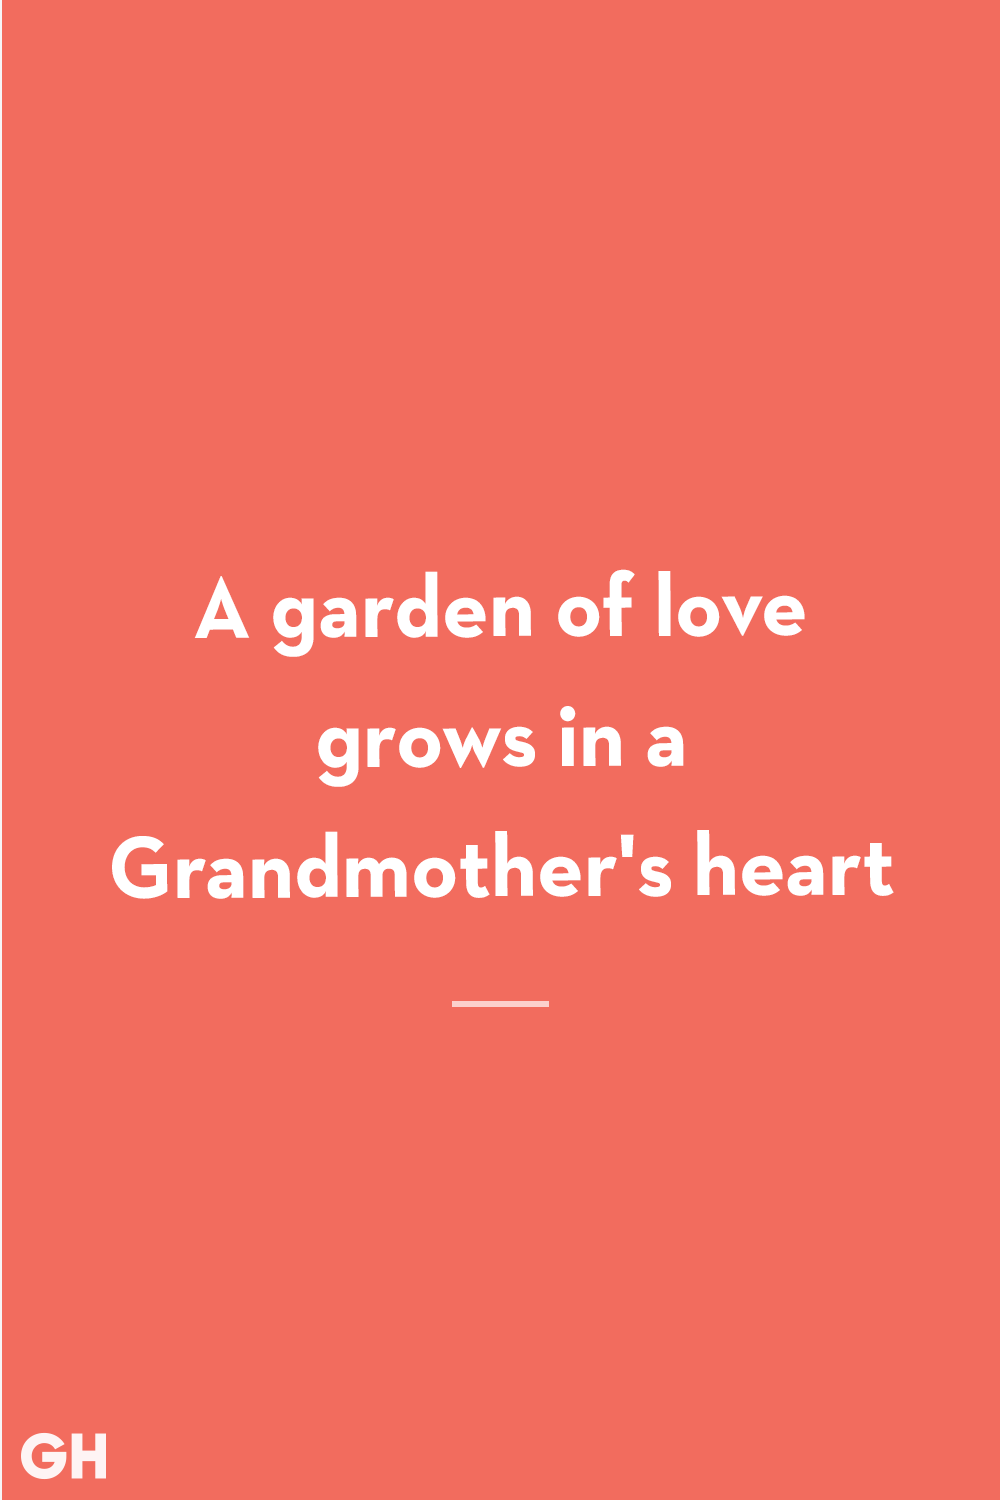 Best Grandma Quotes and Loving Quotes About Grandmothers